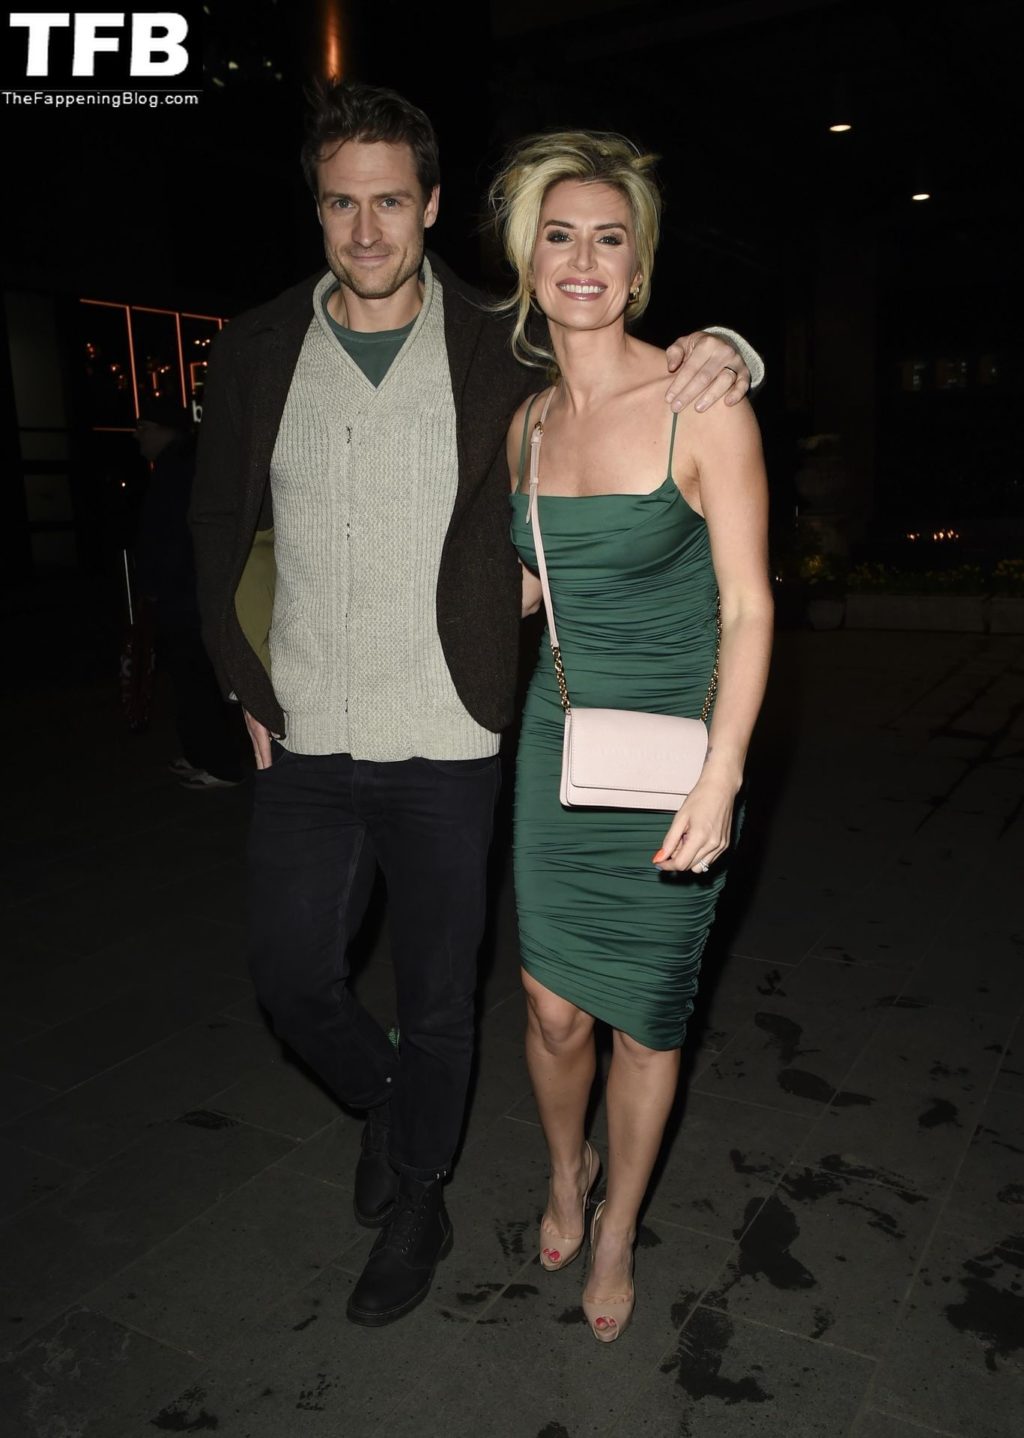 Sarah Jayne Dunn Sexy The Fappening Blog 3 1024x1438 - Sarah Jayne Dunn Looks Hot in a Green Dress Arriving at the Re-Launch of The Alchemist in Spinningfields (26 Photos)